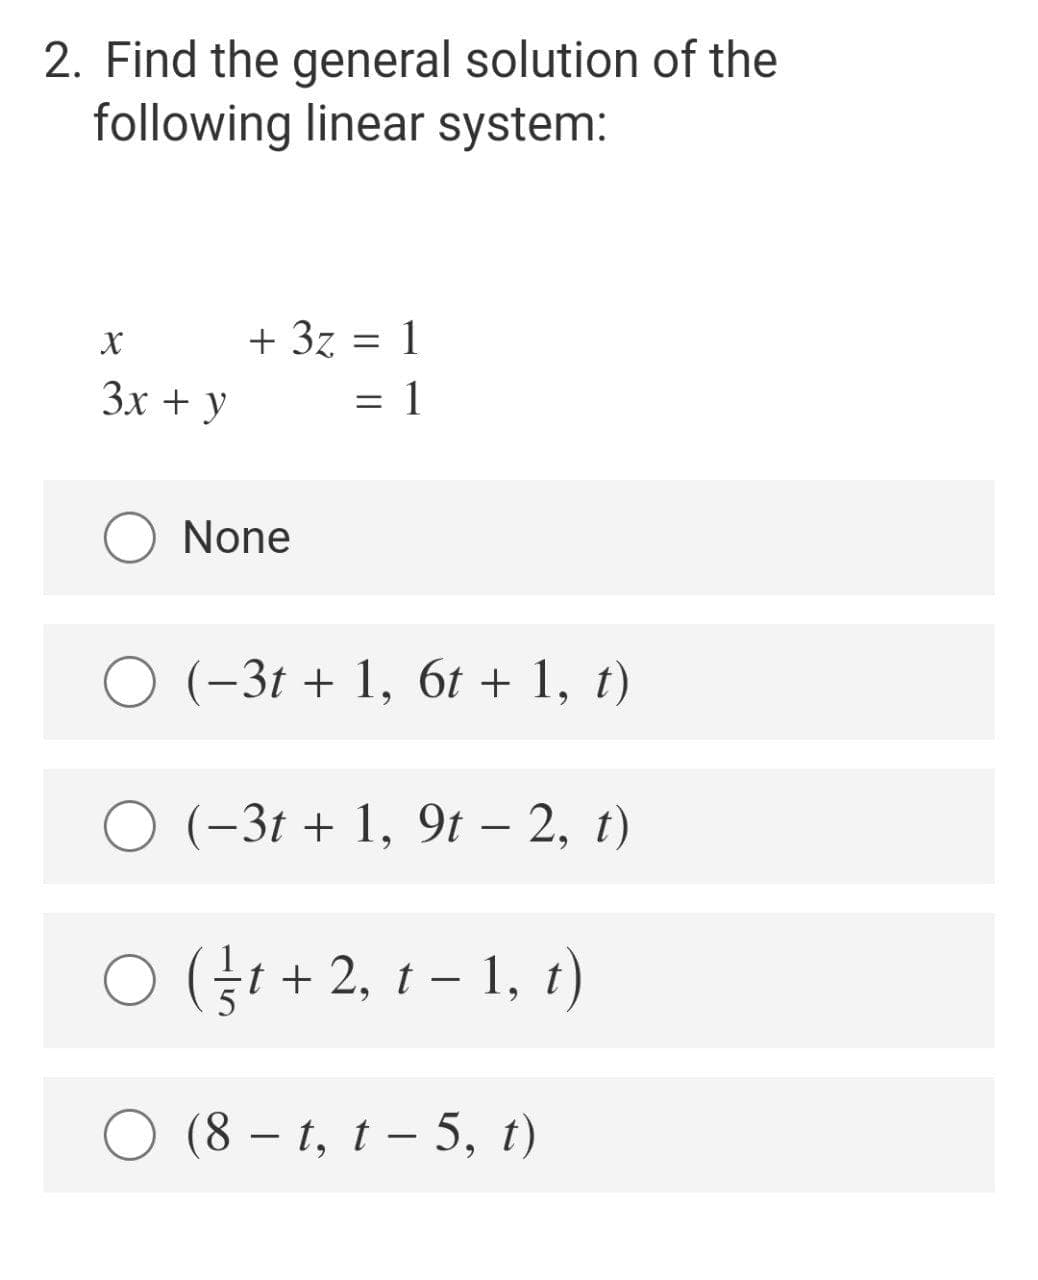 2. Find the general solution of the
following linear system:
X
+ 3z = 1
Зх + у
= 1
None
O (-3t + 1, 6t + 1, t)
O (-3t + 1, 9t – 2, t)
O (i + 2, 1 – 1, t)
|
6.
(8 – 1, t – 5, t)
